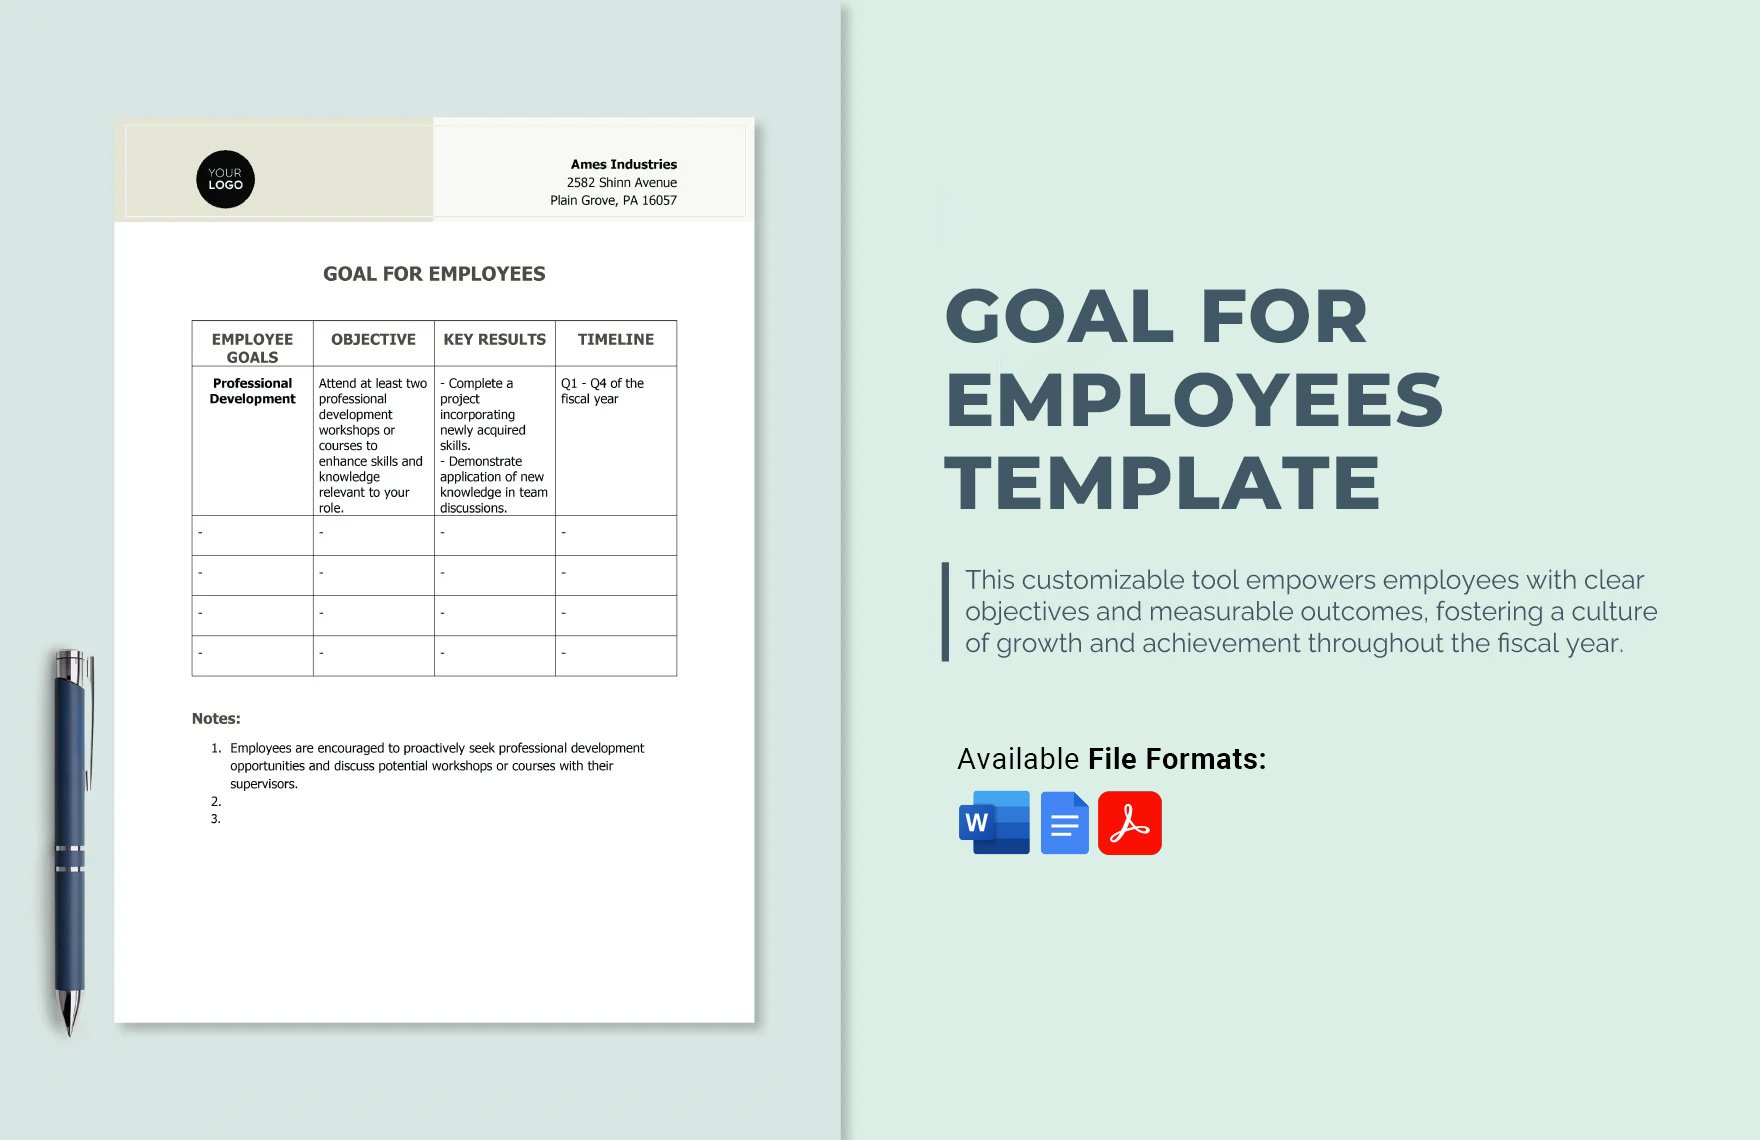 Goal for Employees Template